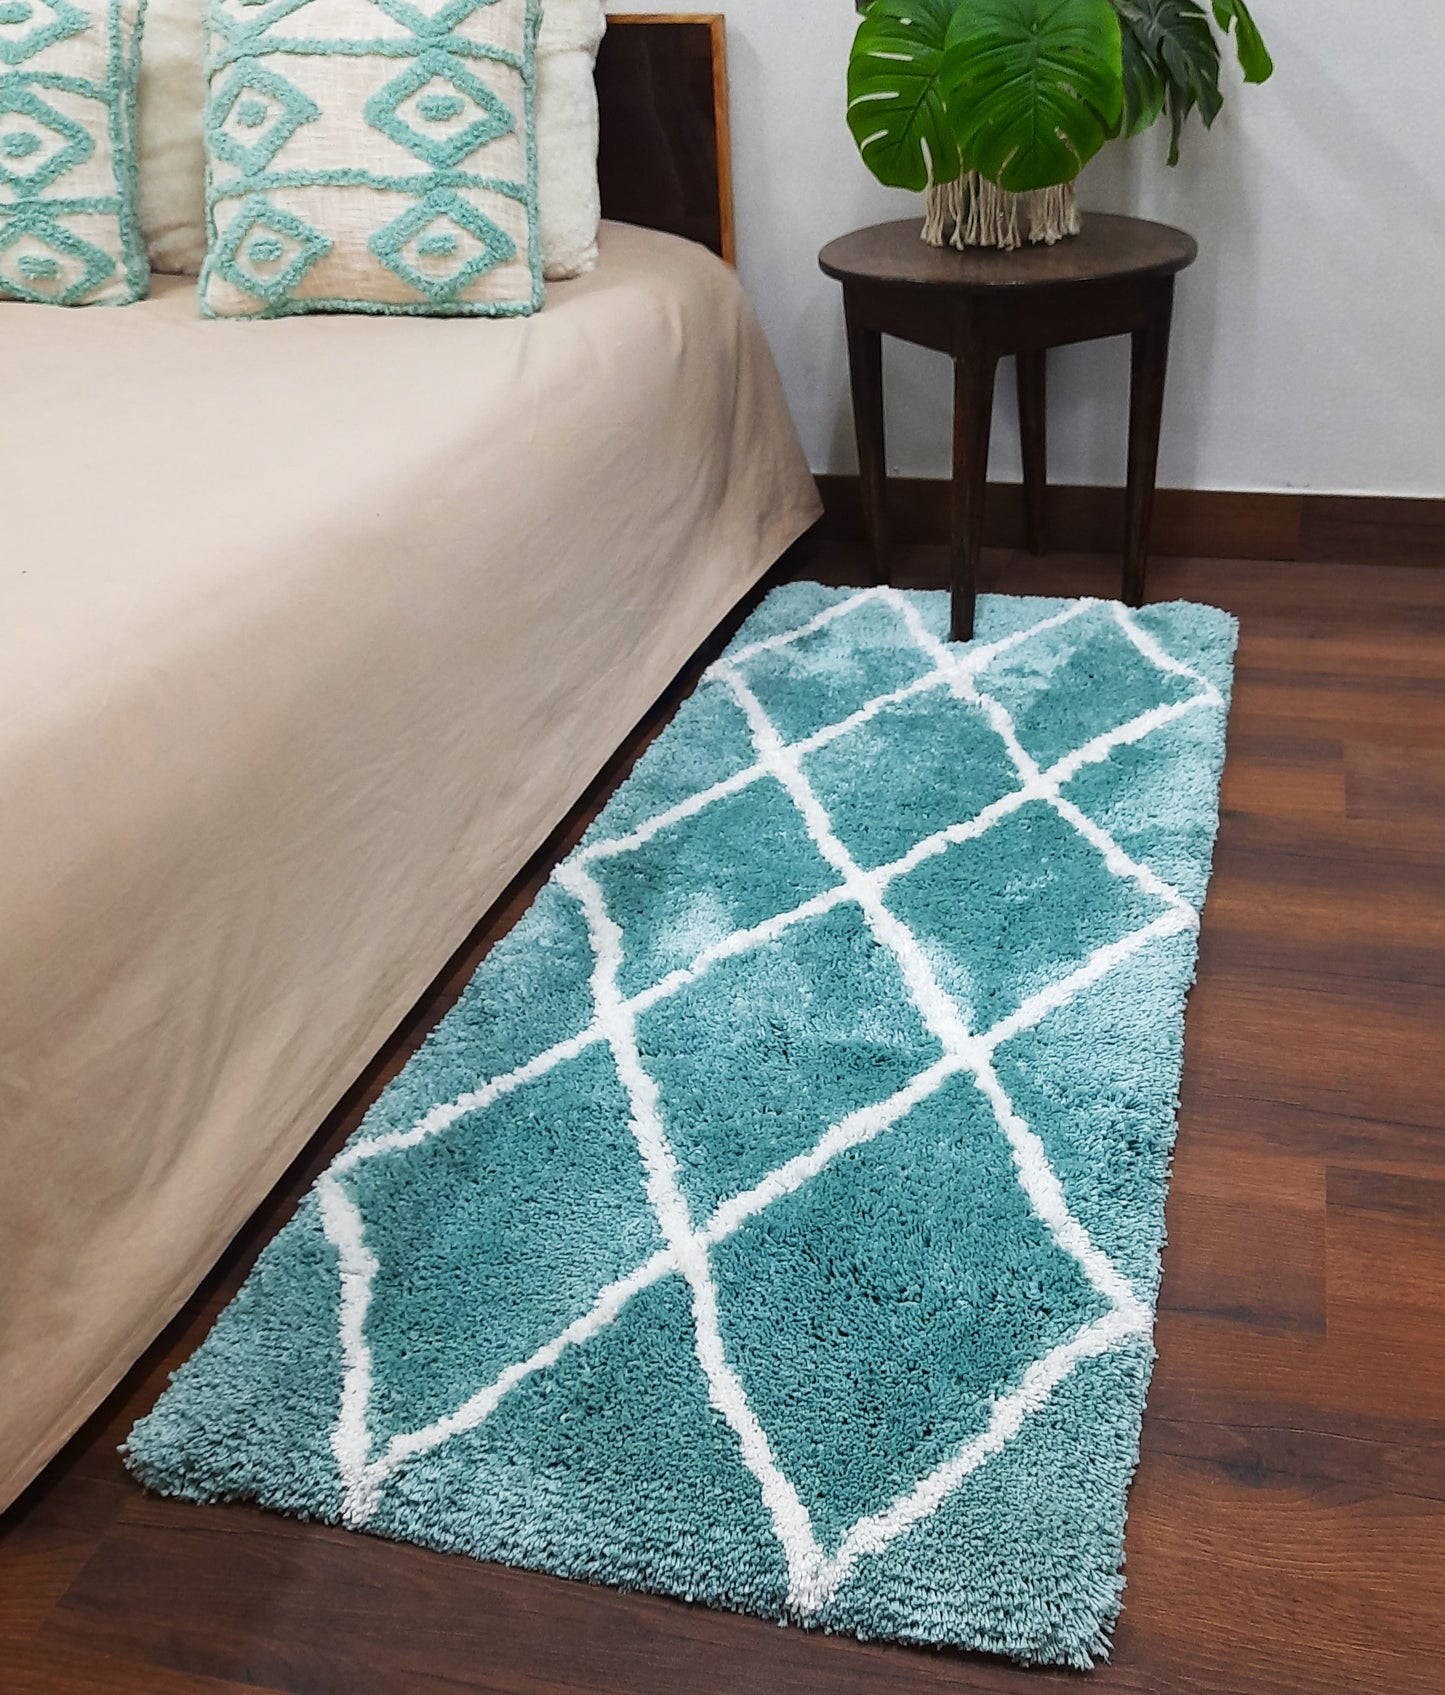 Premium Shaggy Aqua Blue Runner With White Check Design / Bedside Runners by Avioni Home